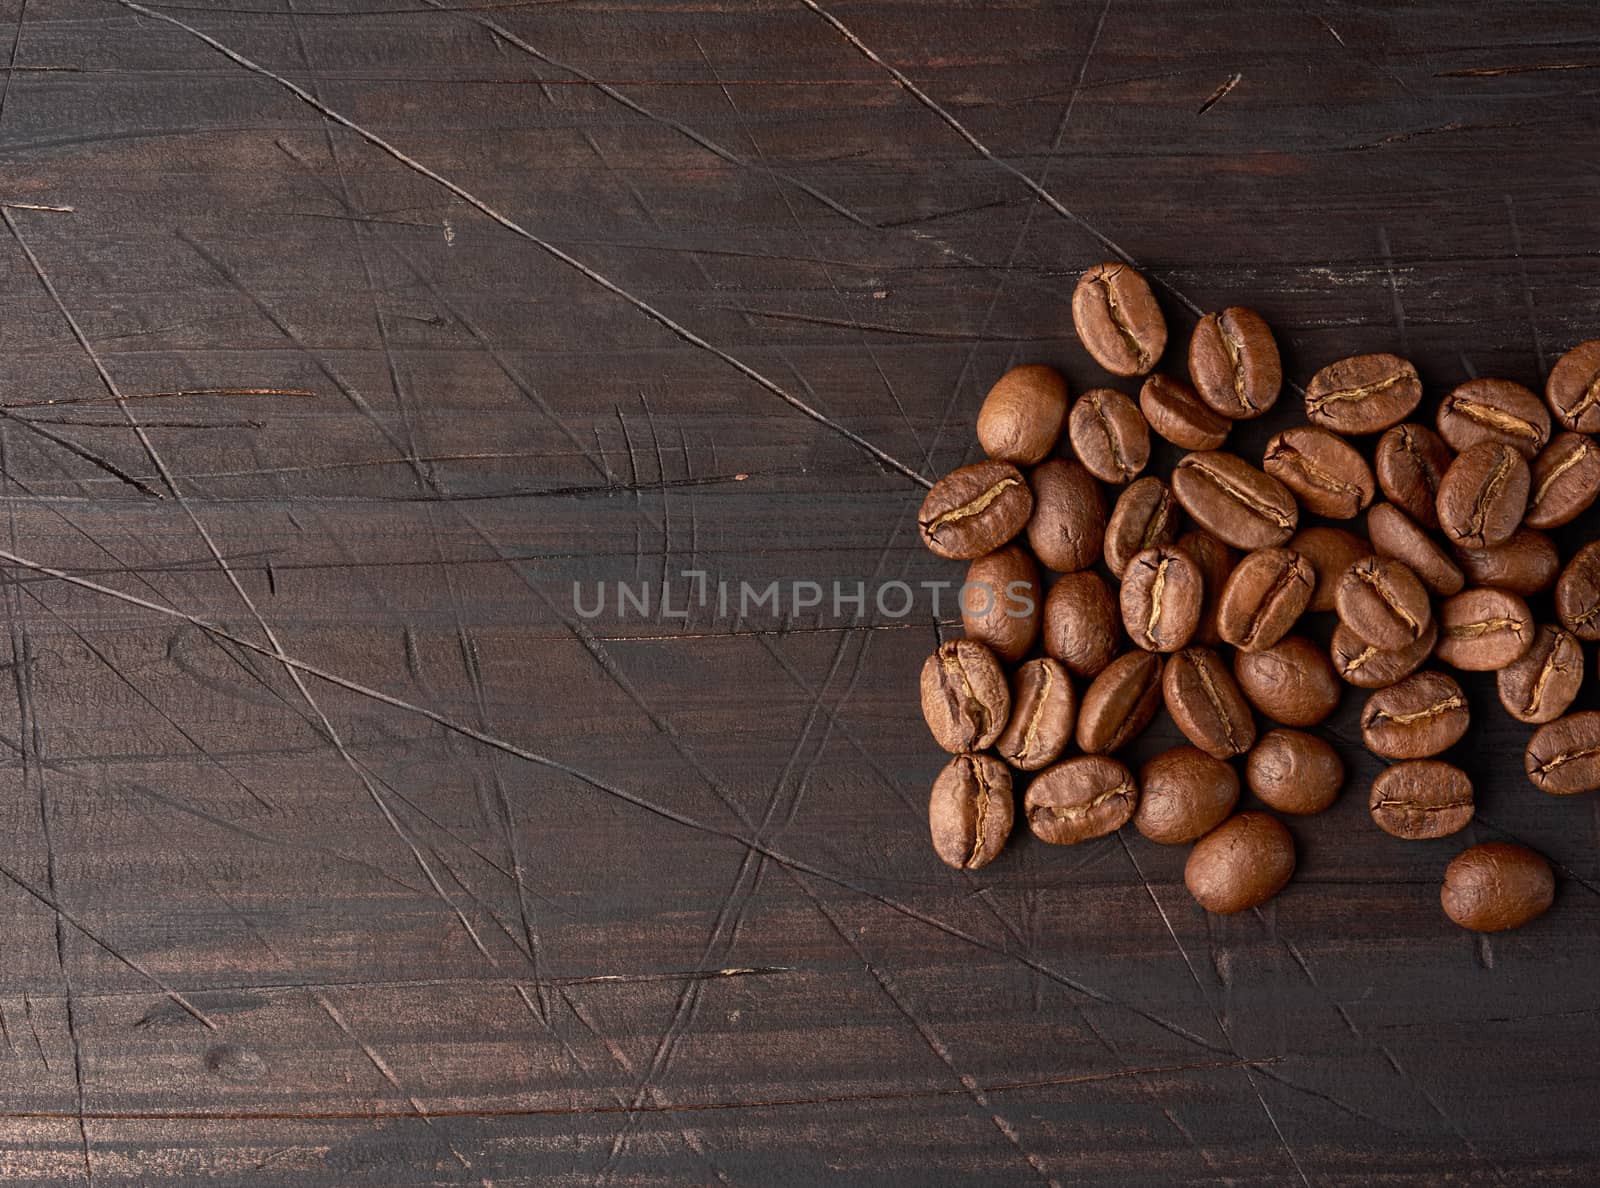 roasted coffee beans arabica on a wooden table, black background by ndanko